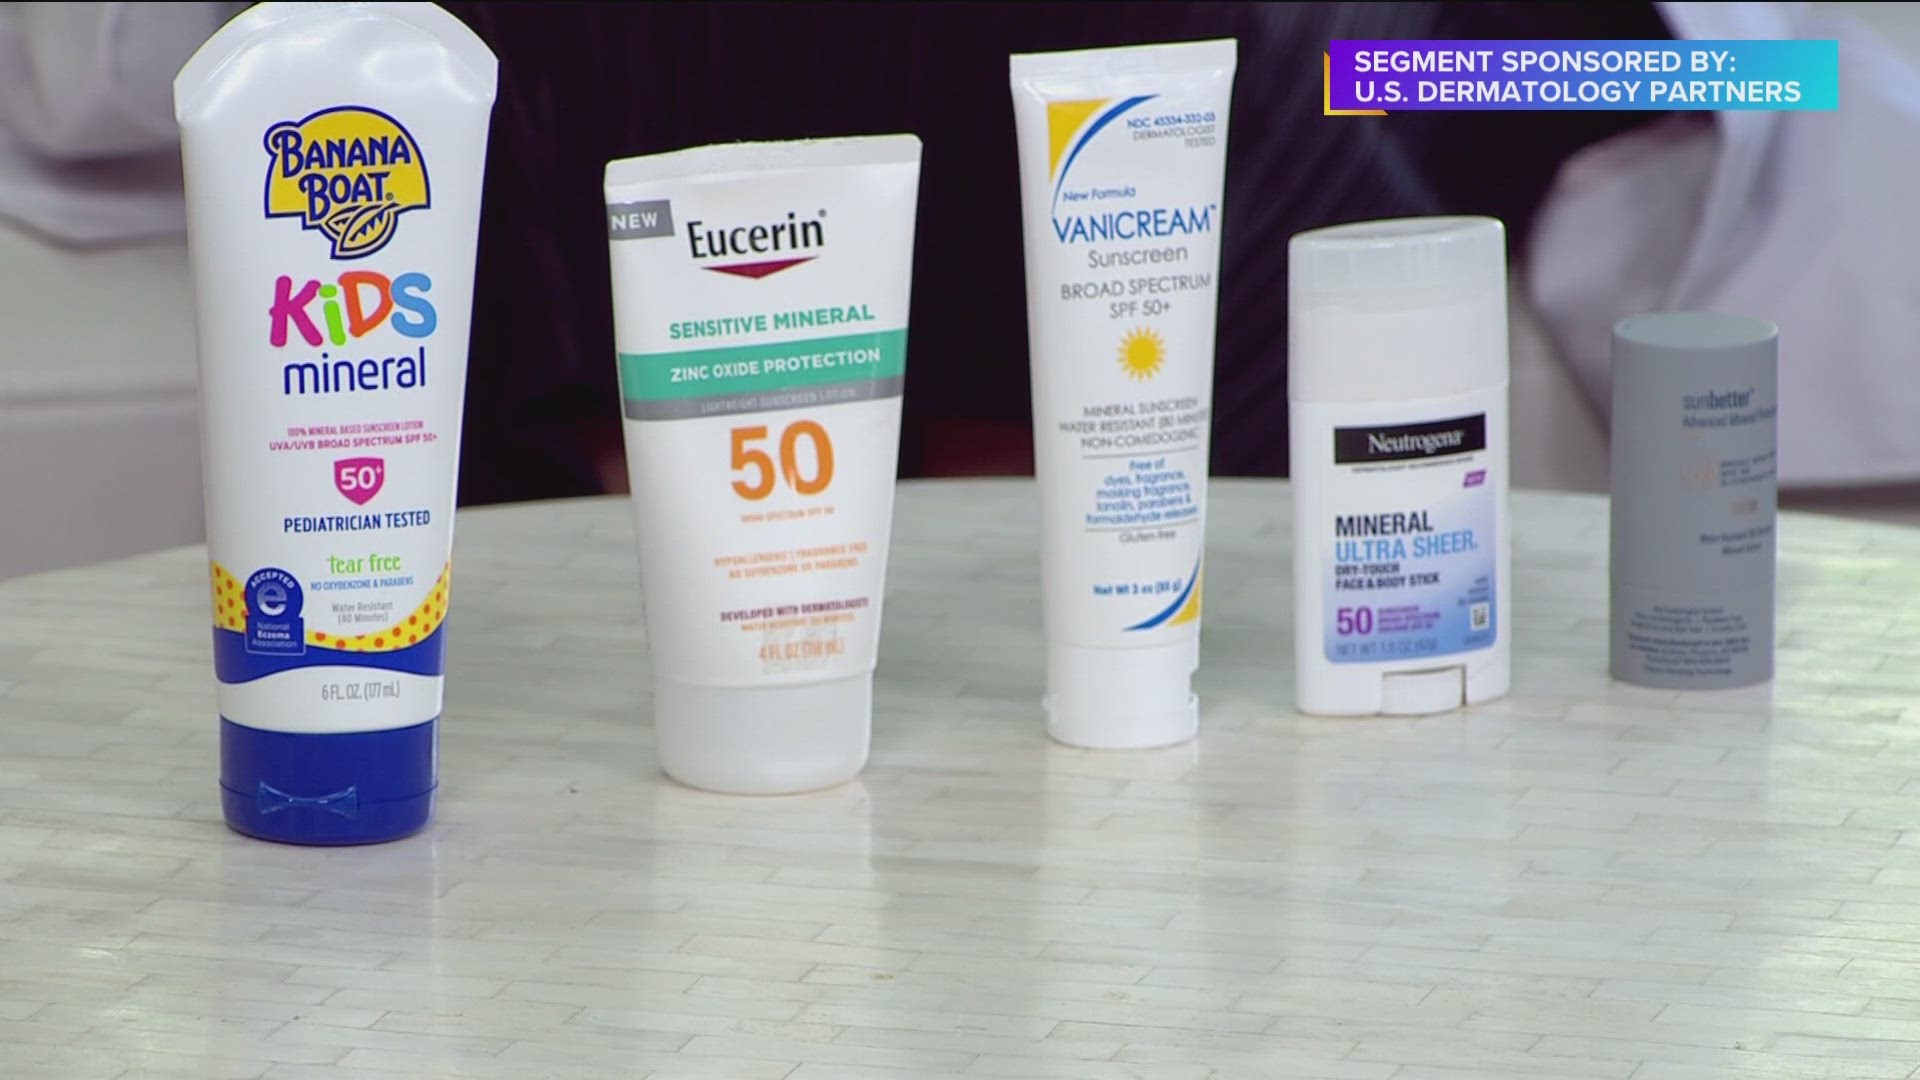 Dr. Watchmaker shares tips and tricks to keep babies and kids safe from sun damage this season.